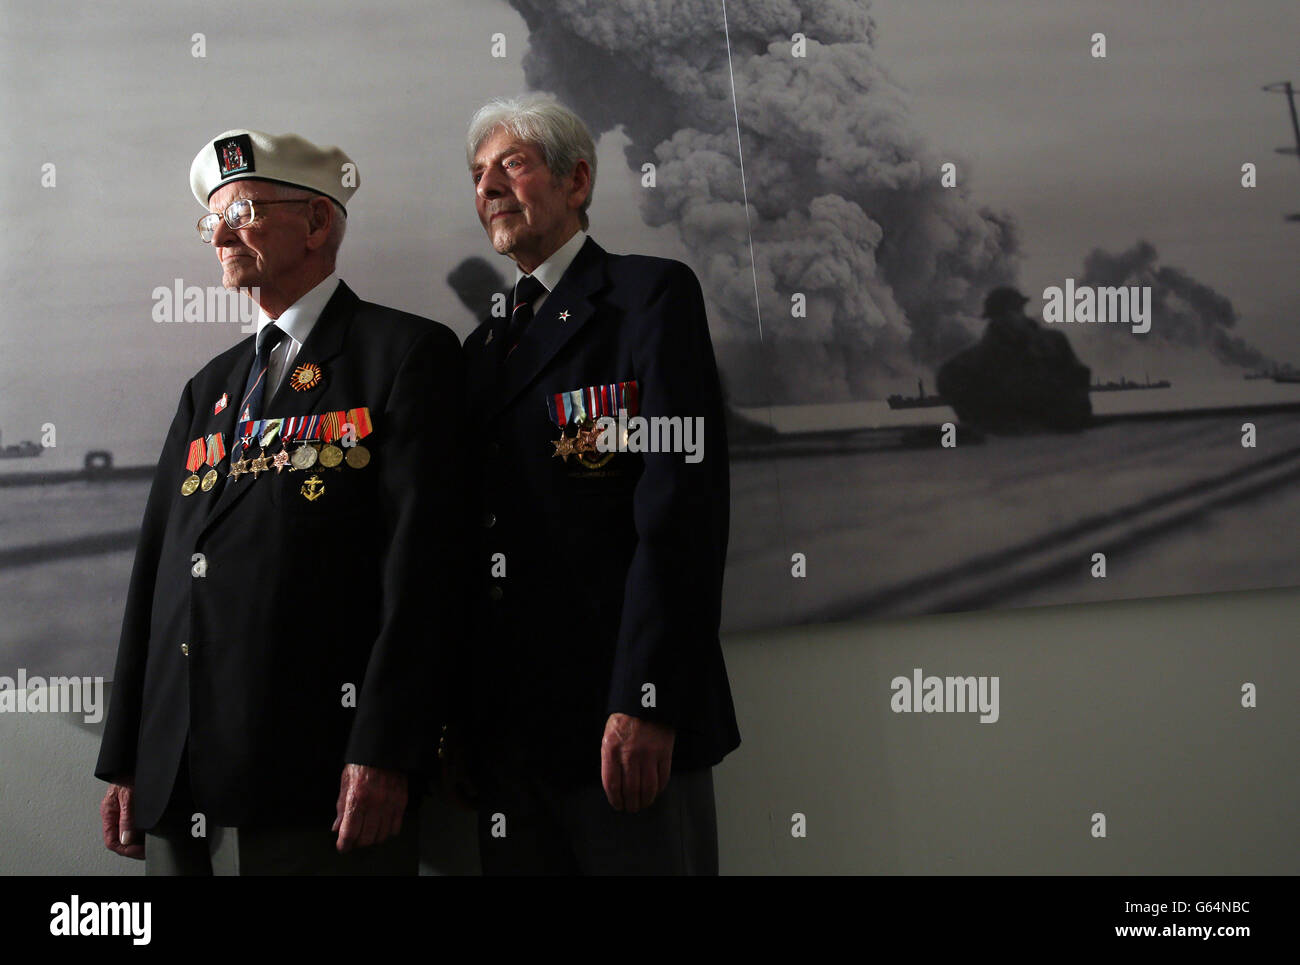 David Craig, a former merchant navy seaman (left) and James Simpson, formerly of the Royal Navy talk at the Arctic Convoys exhibition which opens on May 29 at the National War Museum Edinburgh Castle. The convoys sailed from Britain from in 1941 to 1945 delivering supplies to the Soviet Union. Stock Photo